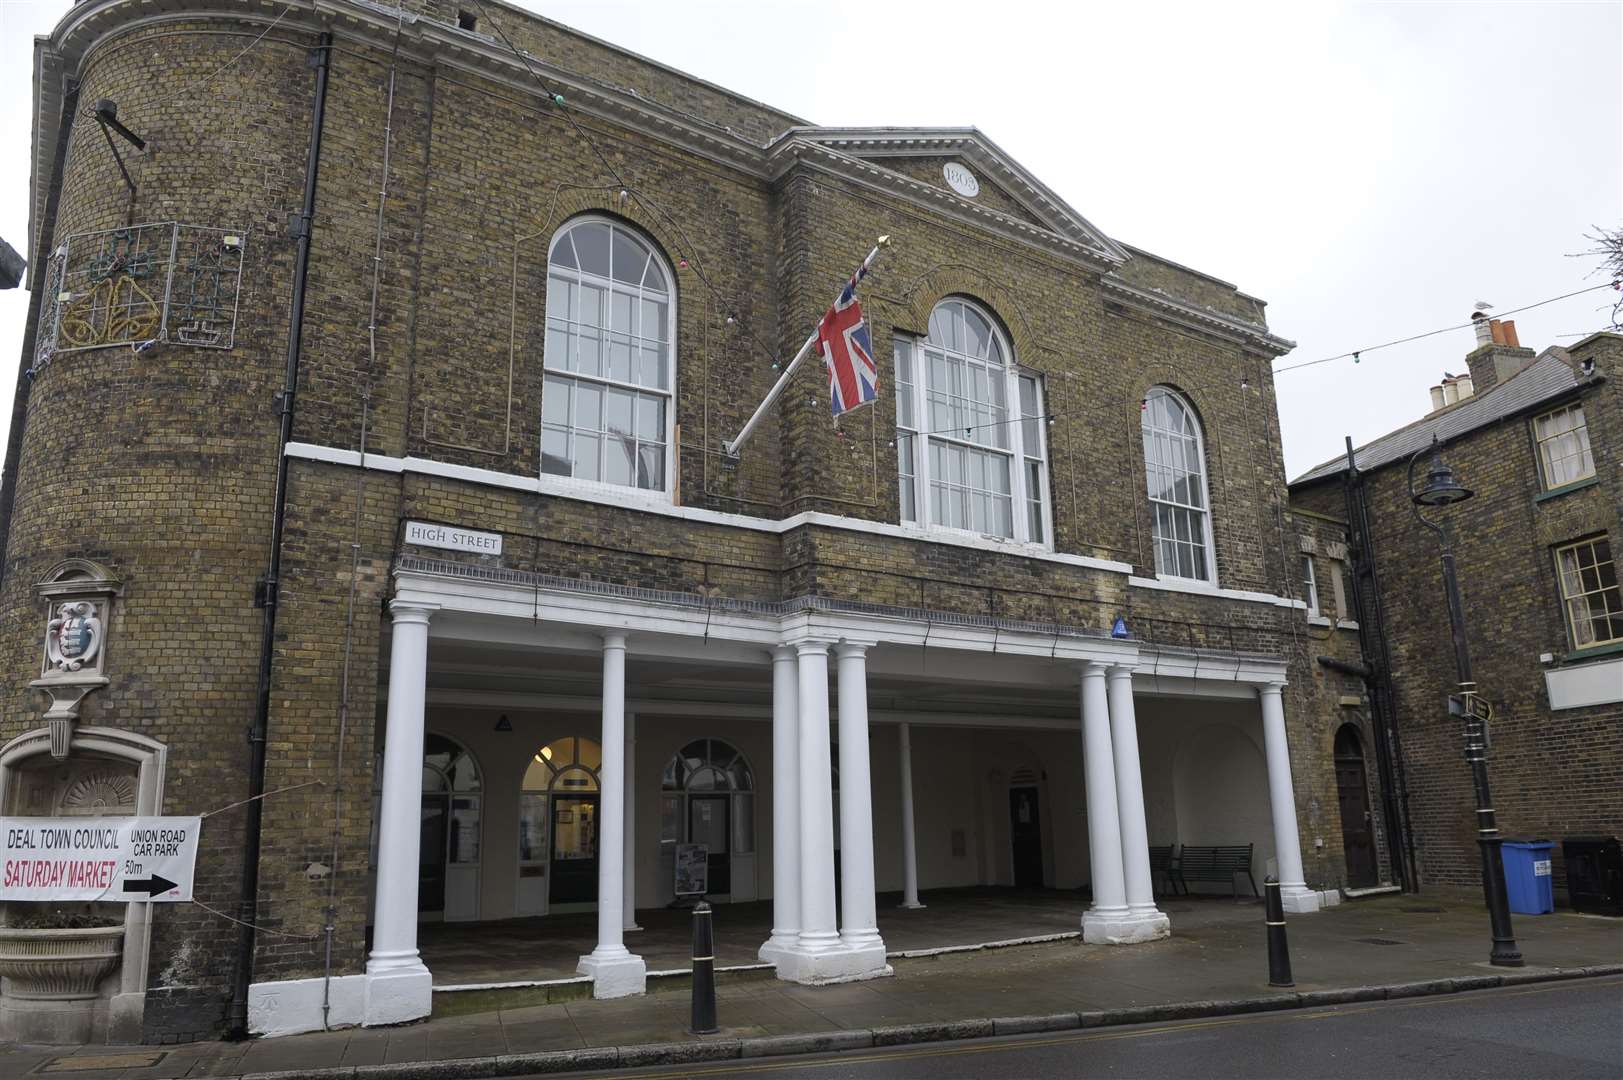 Deal Town Council's usual base, the Town Hall